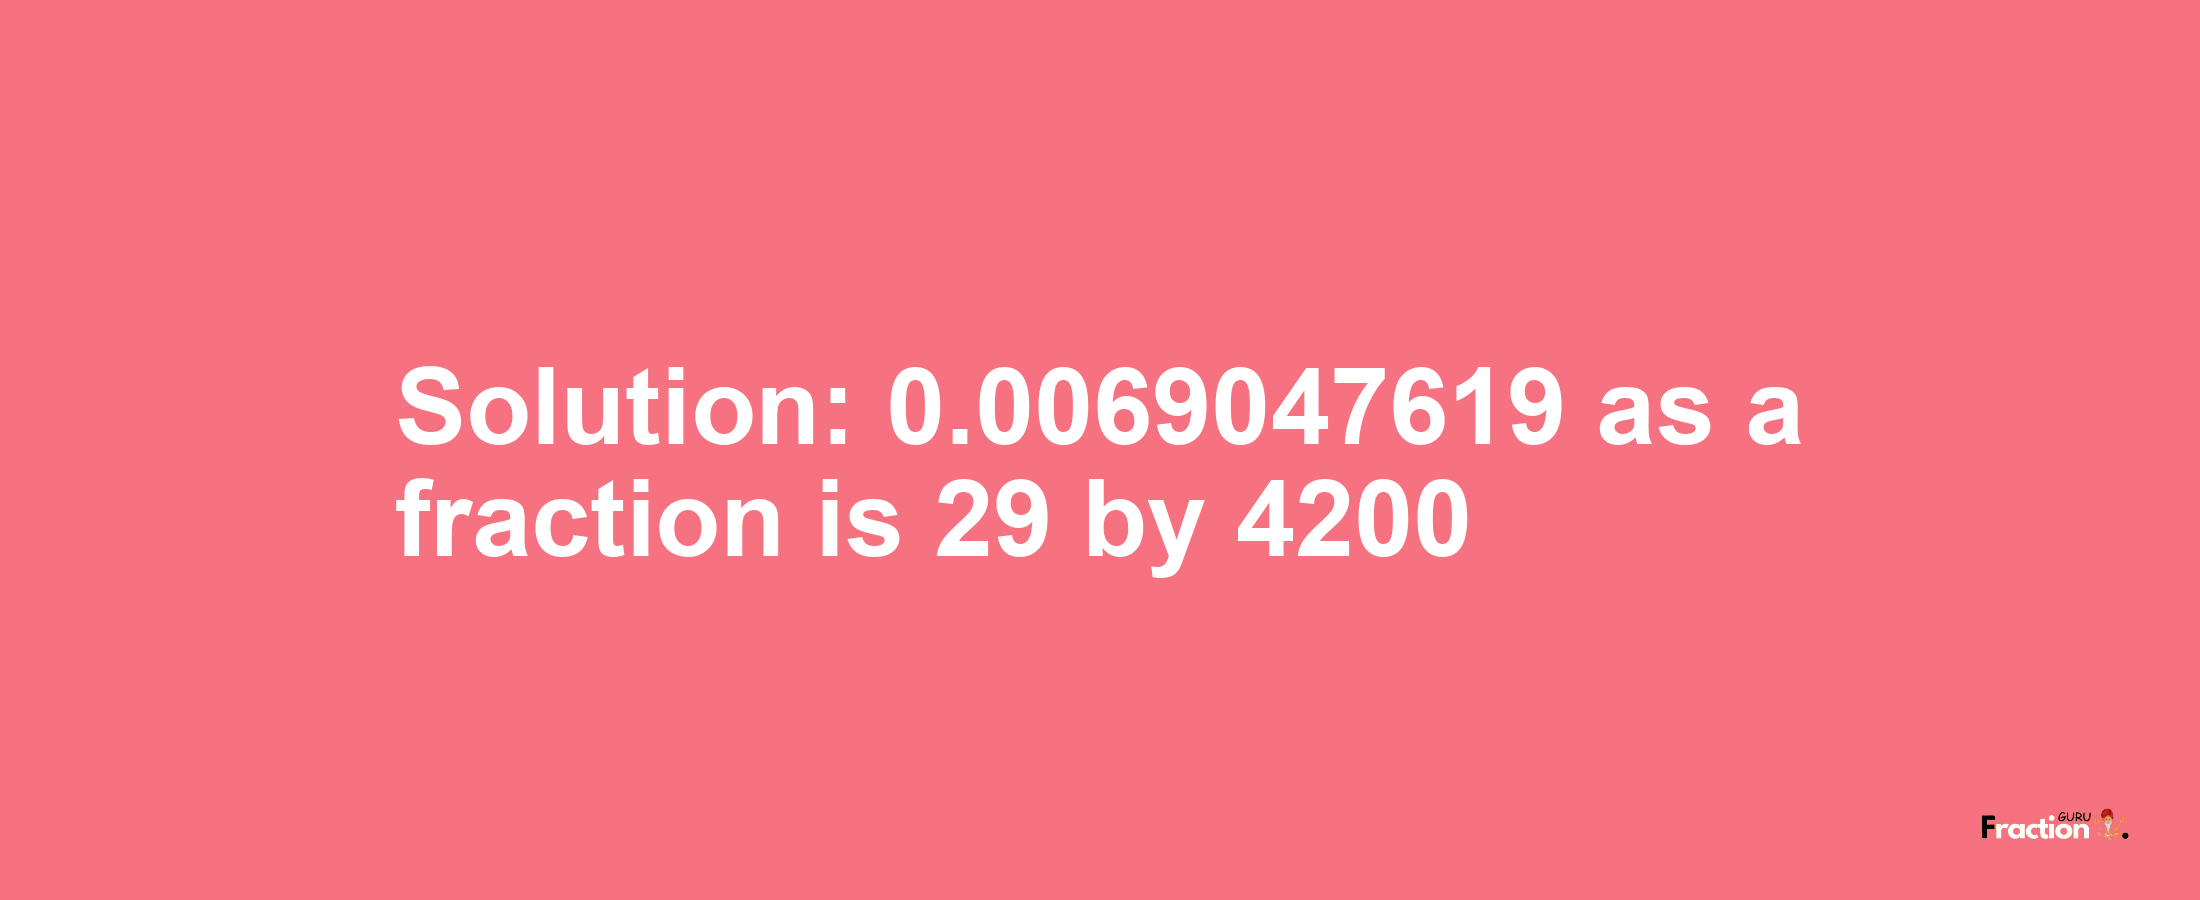 Solution:0.0069047619 as a fraction is 29/4200